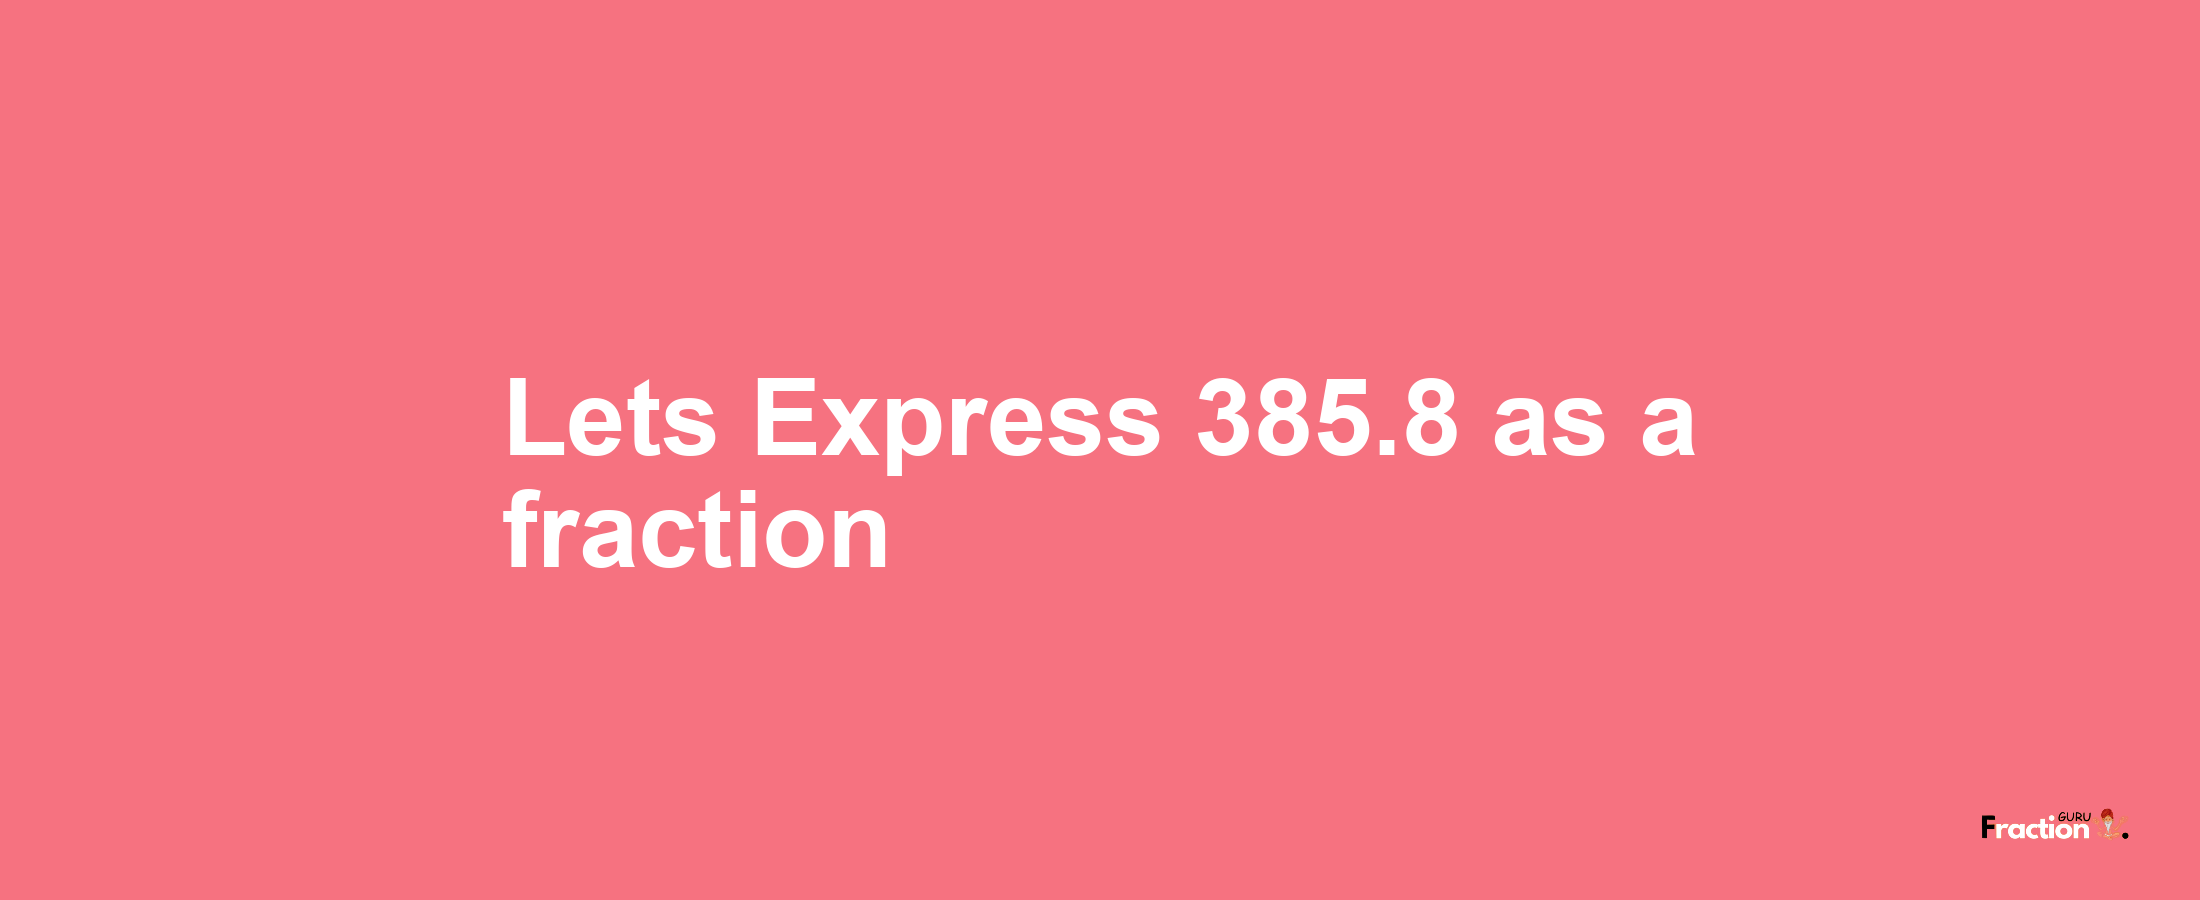 Lets Express 385.8 as afraction